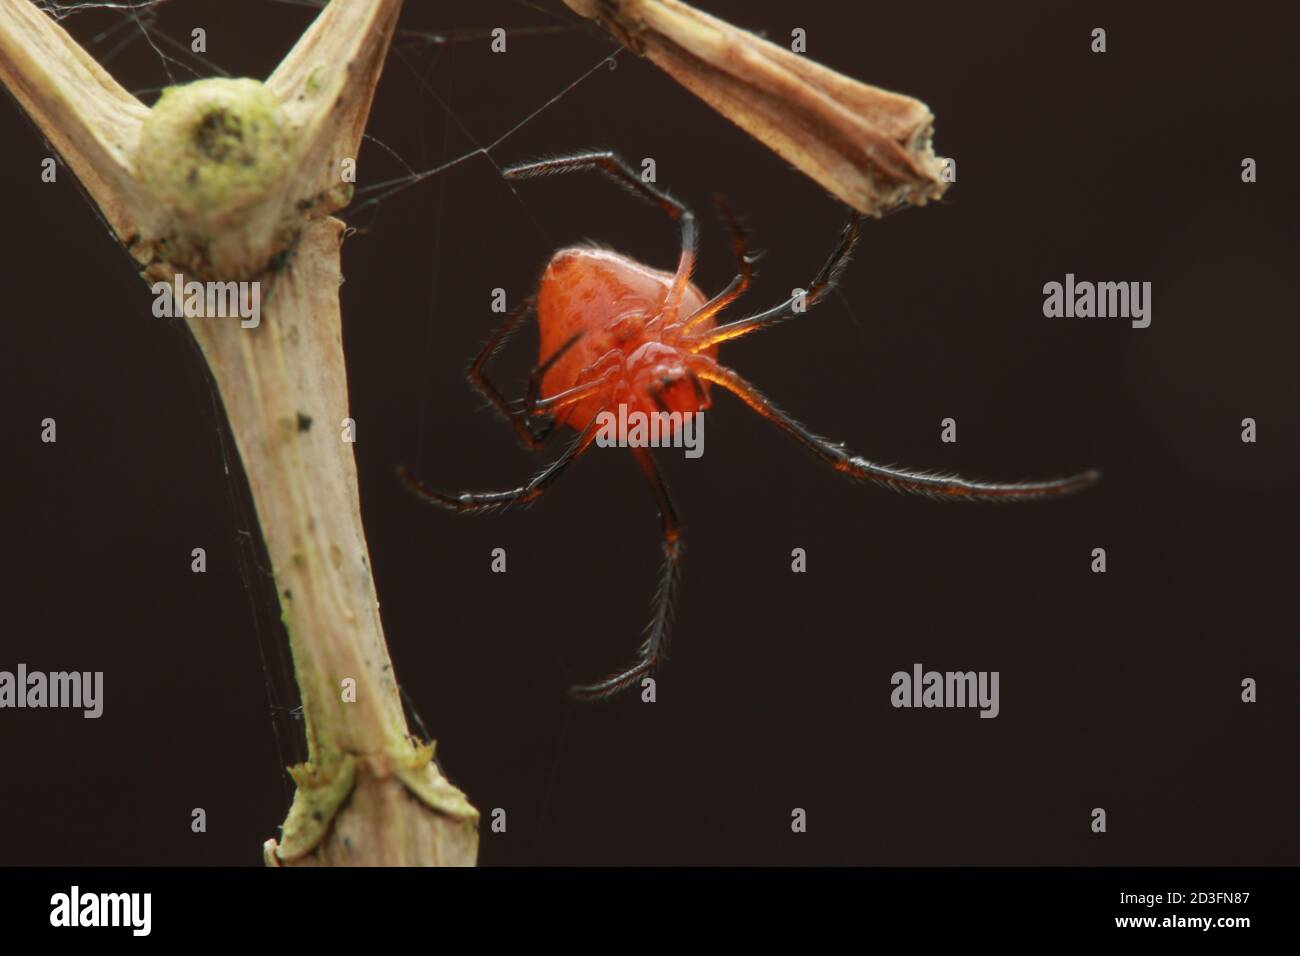 Comb-footed Spider, probably Argyrodes Stock Photo